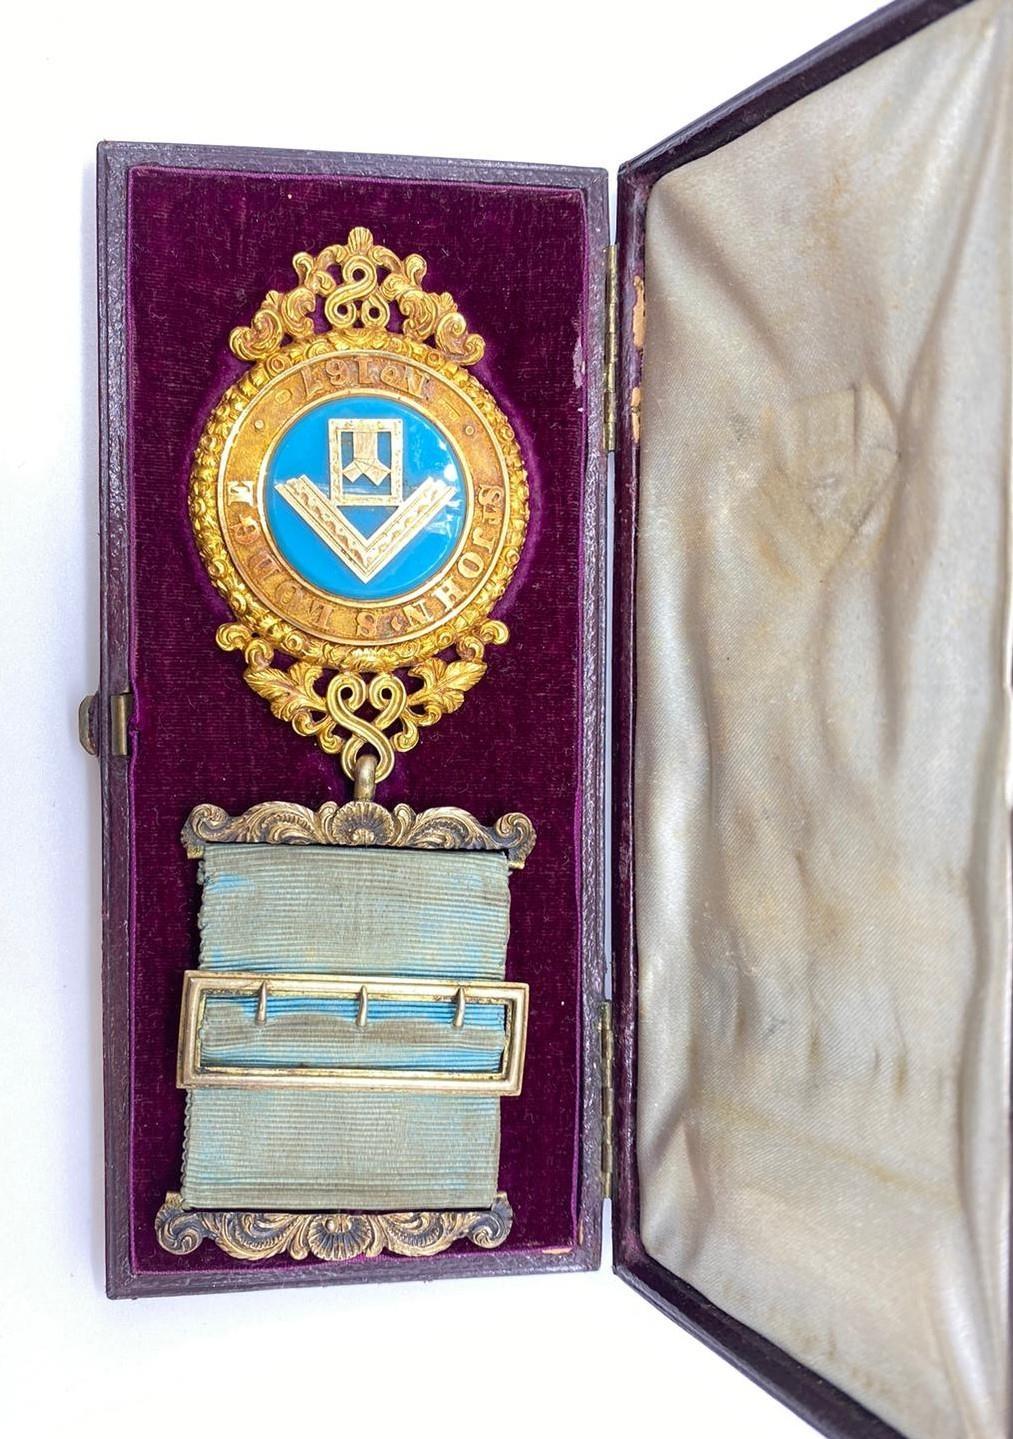 18ct gold Masonic jewel dated 1865 from the St's John lodge Hampstead number 167, weight 62.3g total - Image 3 of 8